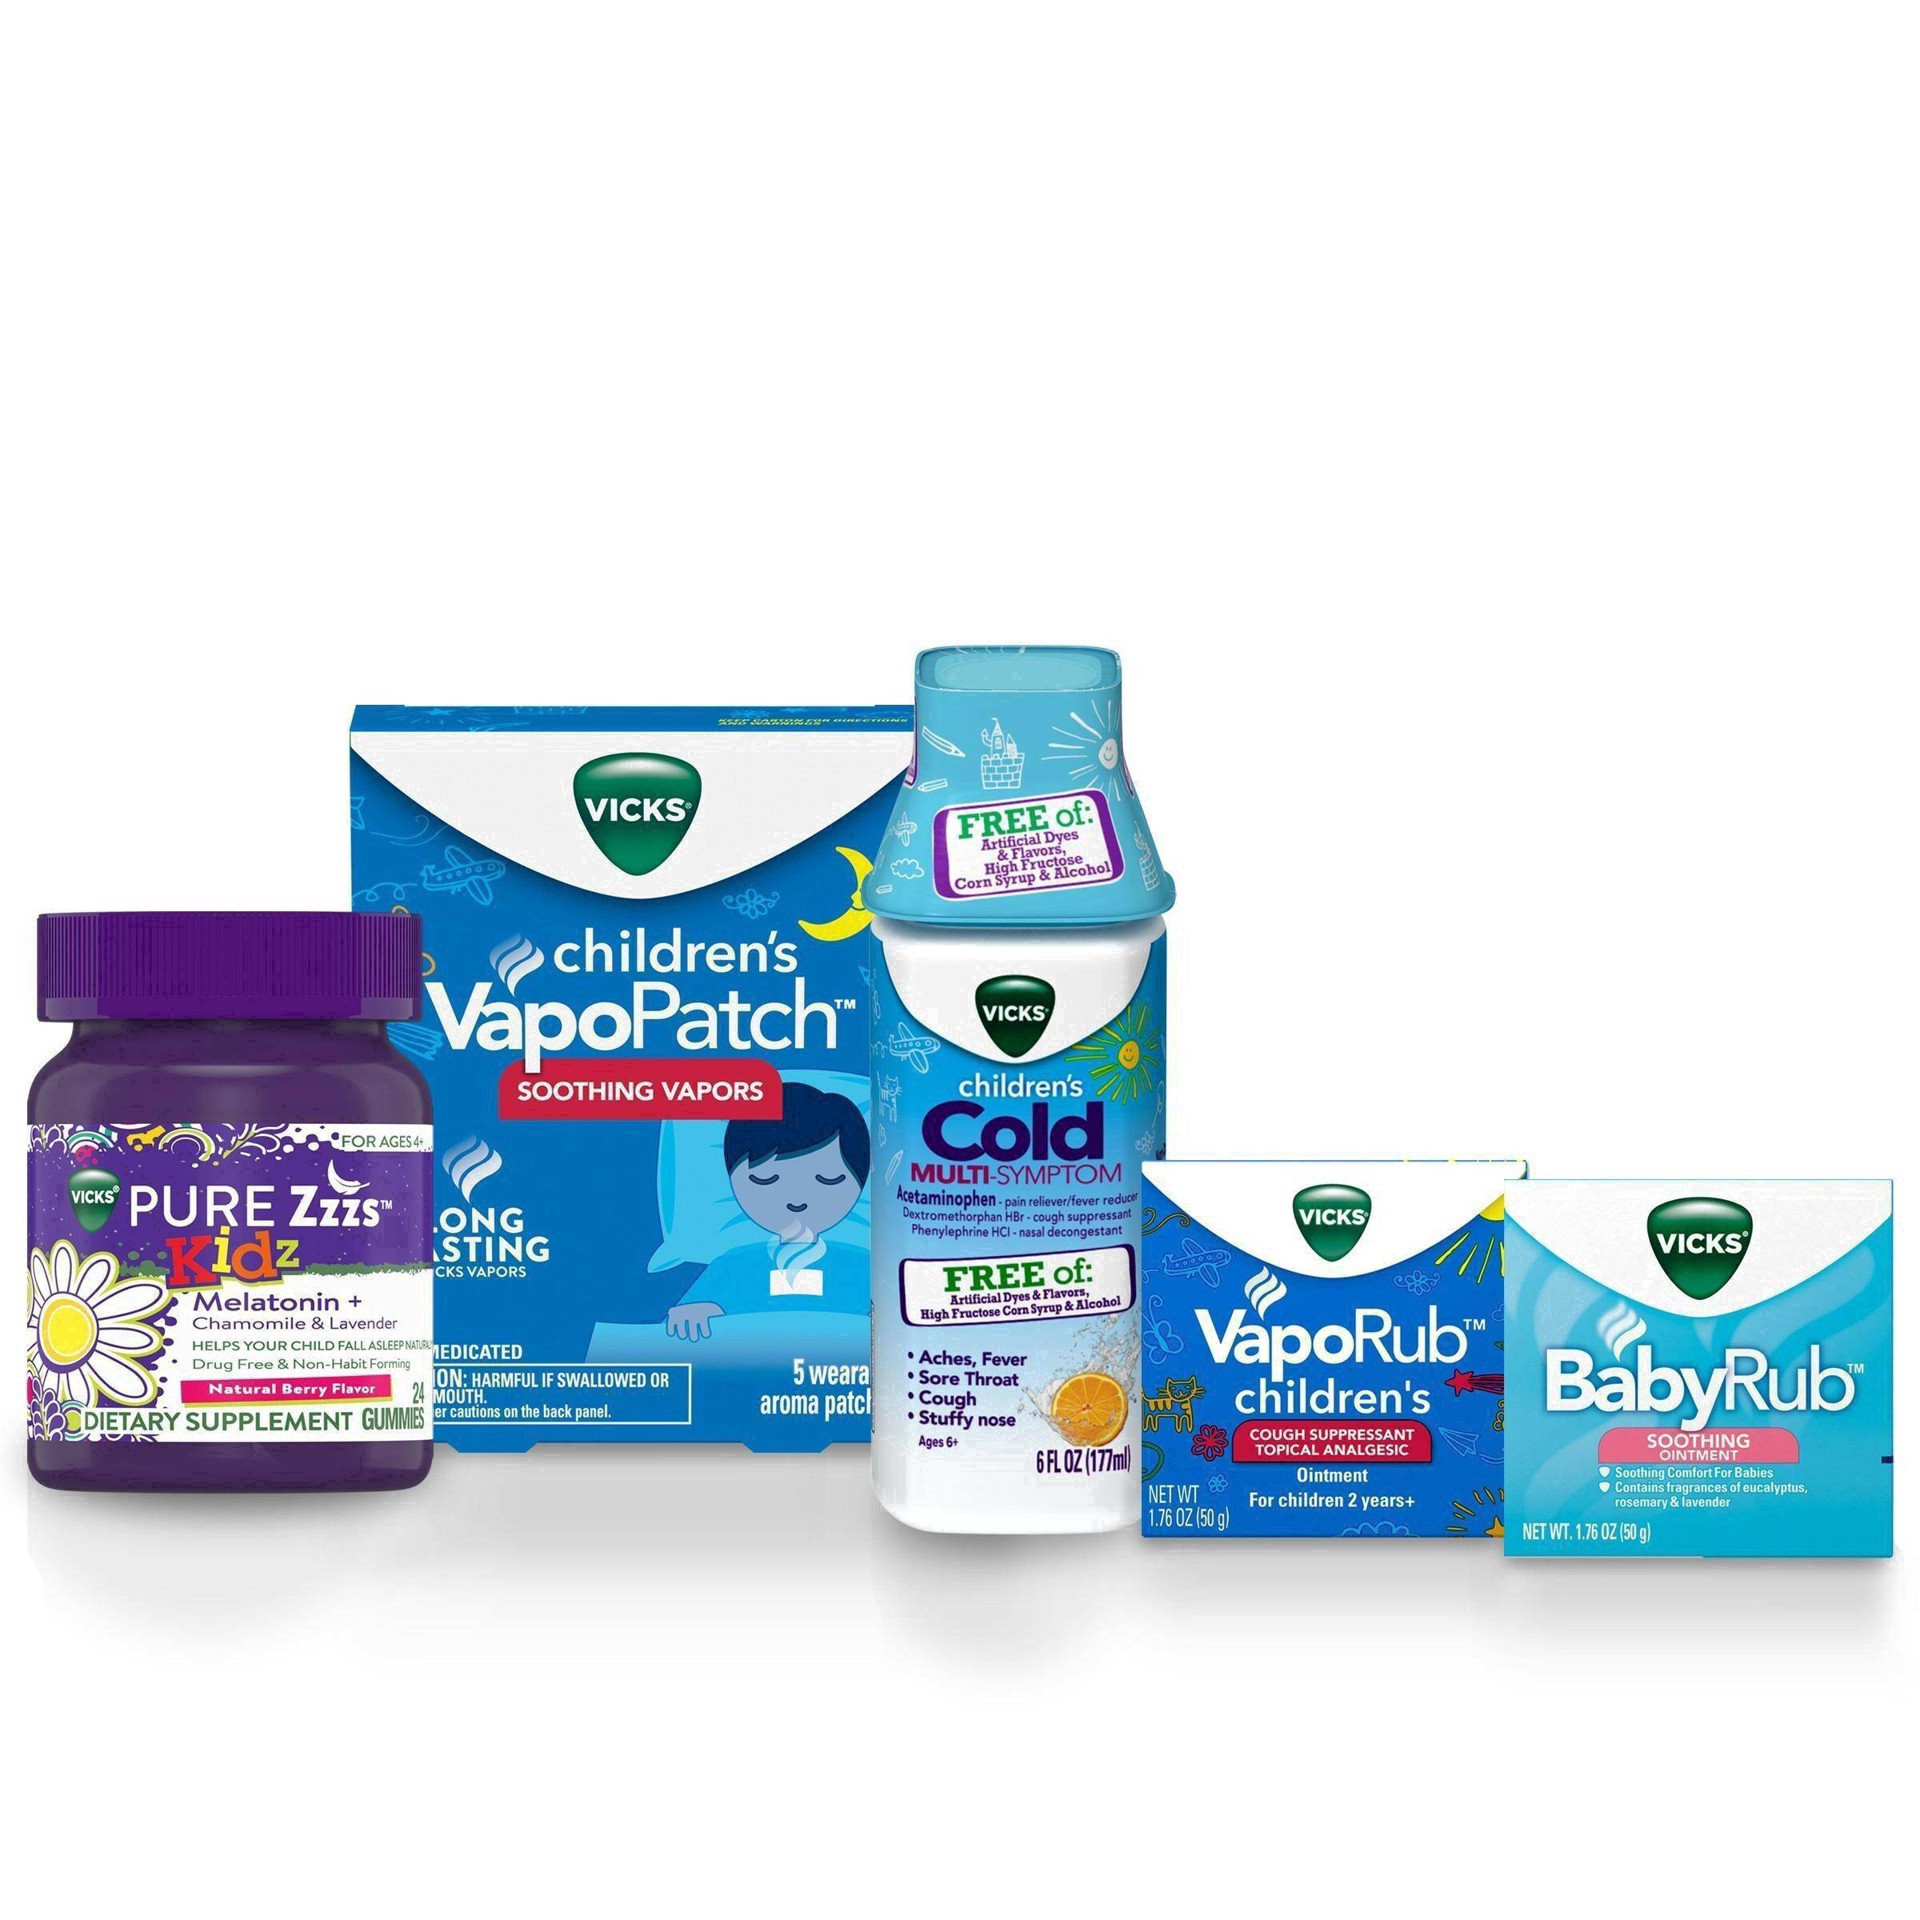 slide 20 of 37, Vicks Children's VapoPatch with Long Lasting Soothing Vapors - Menthol - 5ct, 5 ct